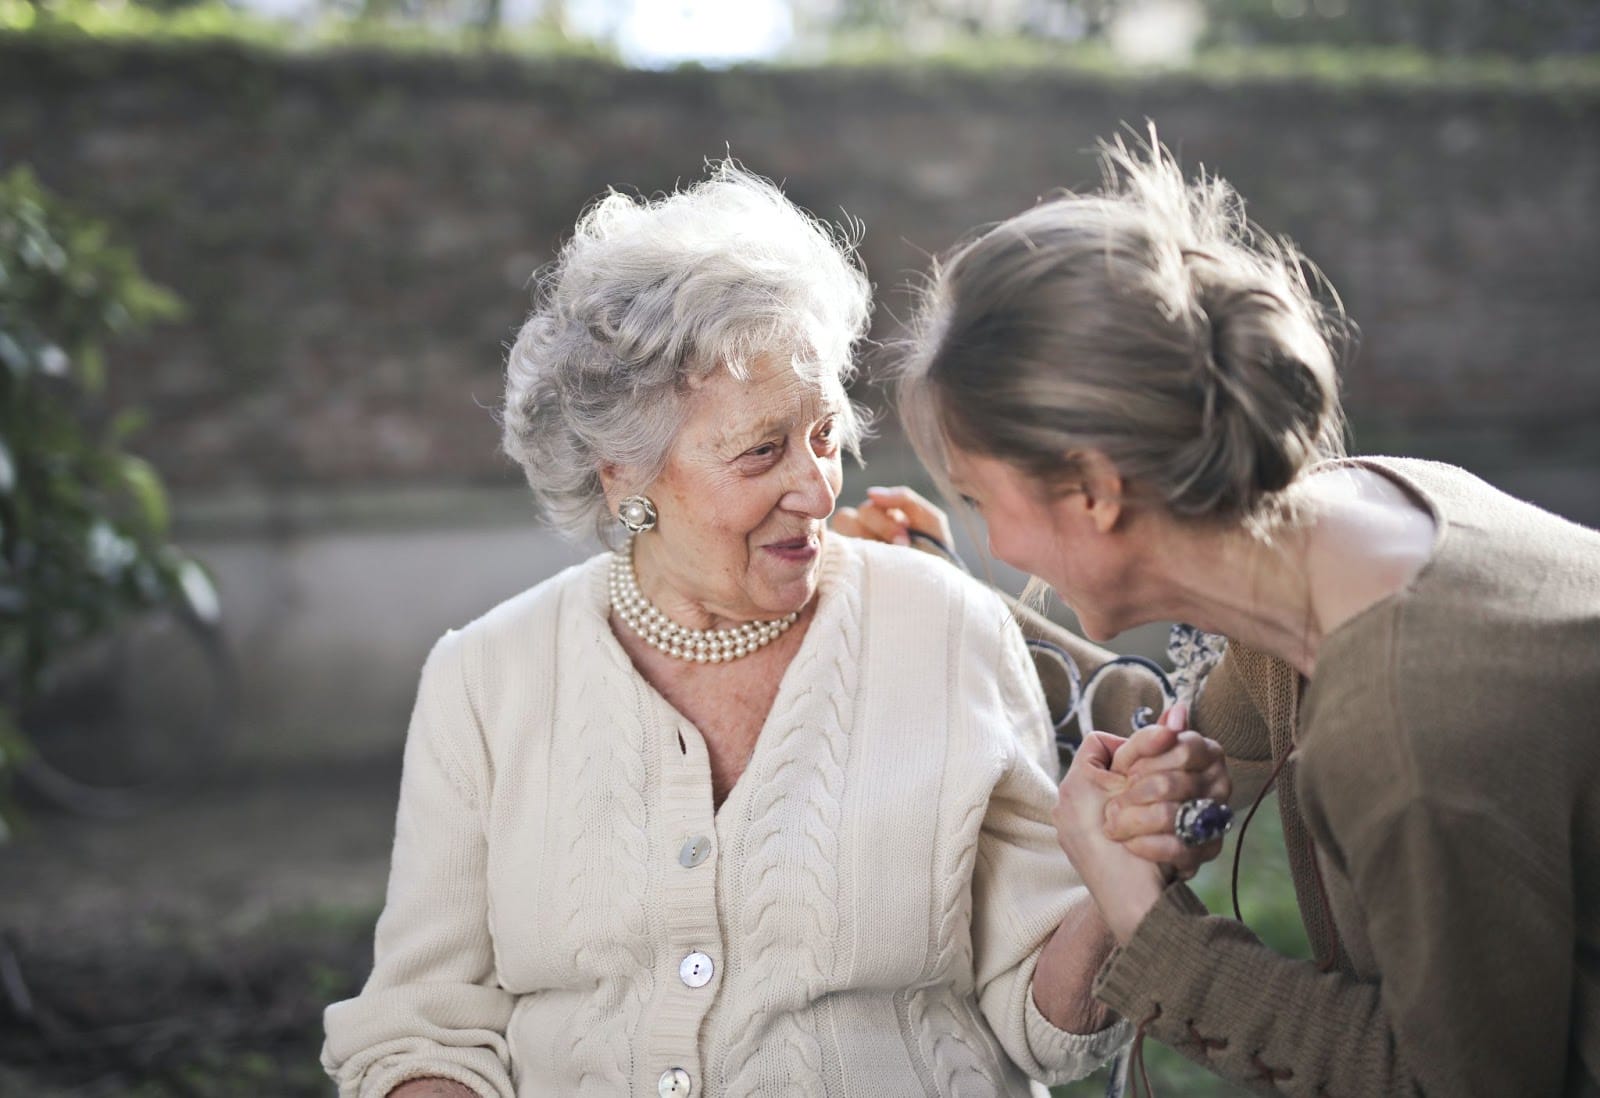 An elderly lady smiling and holding hands with a younger adult woman